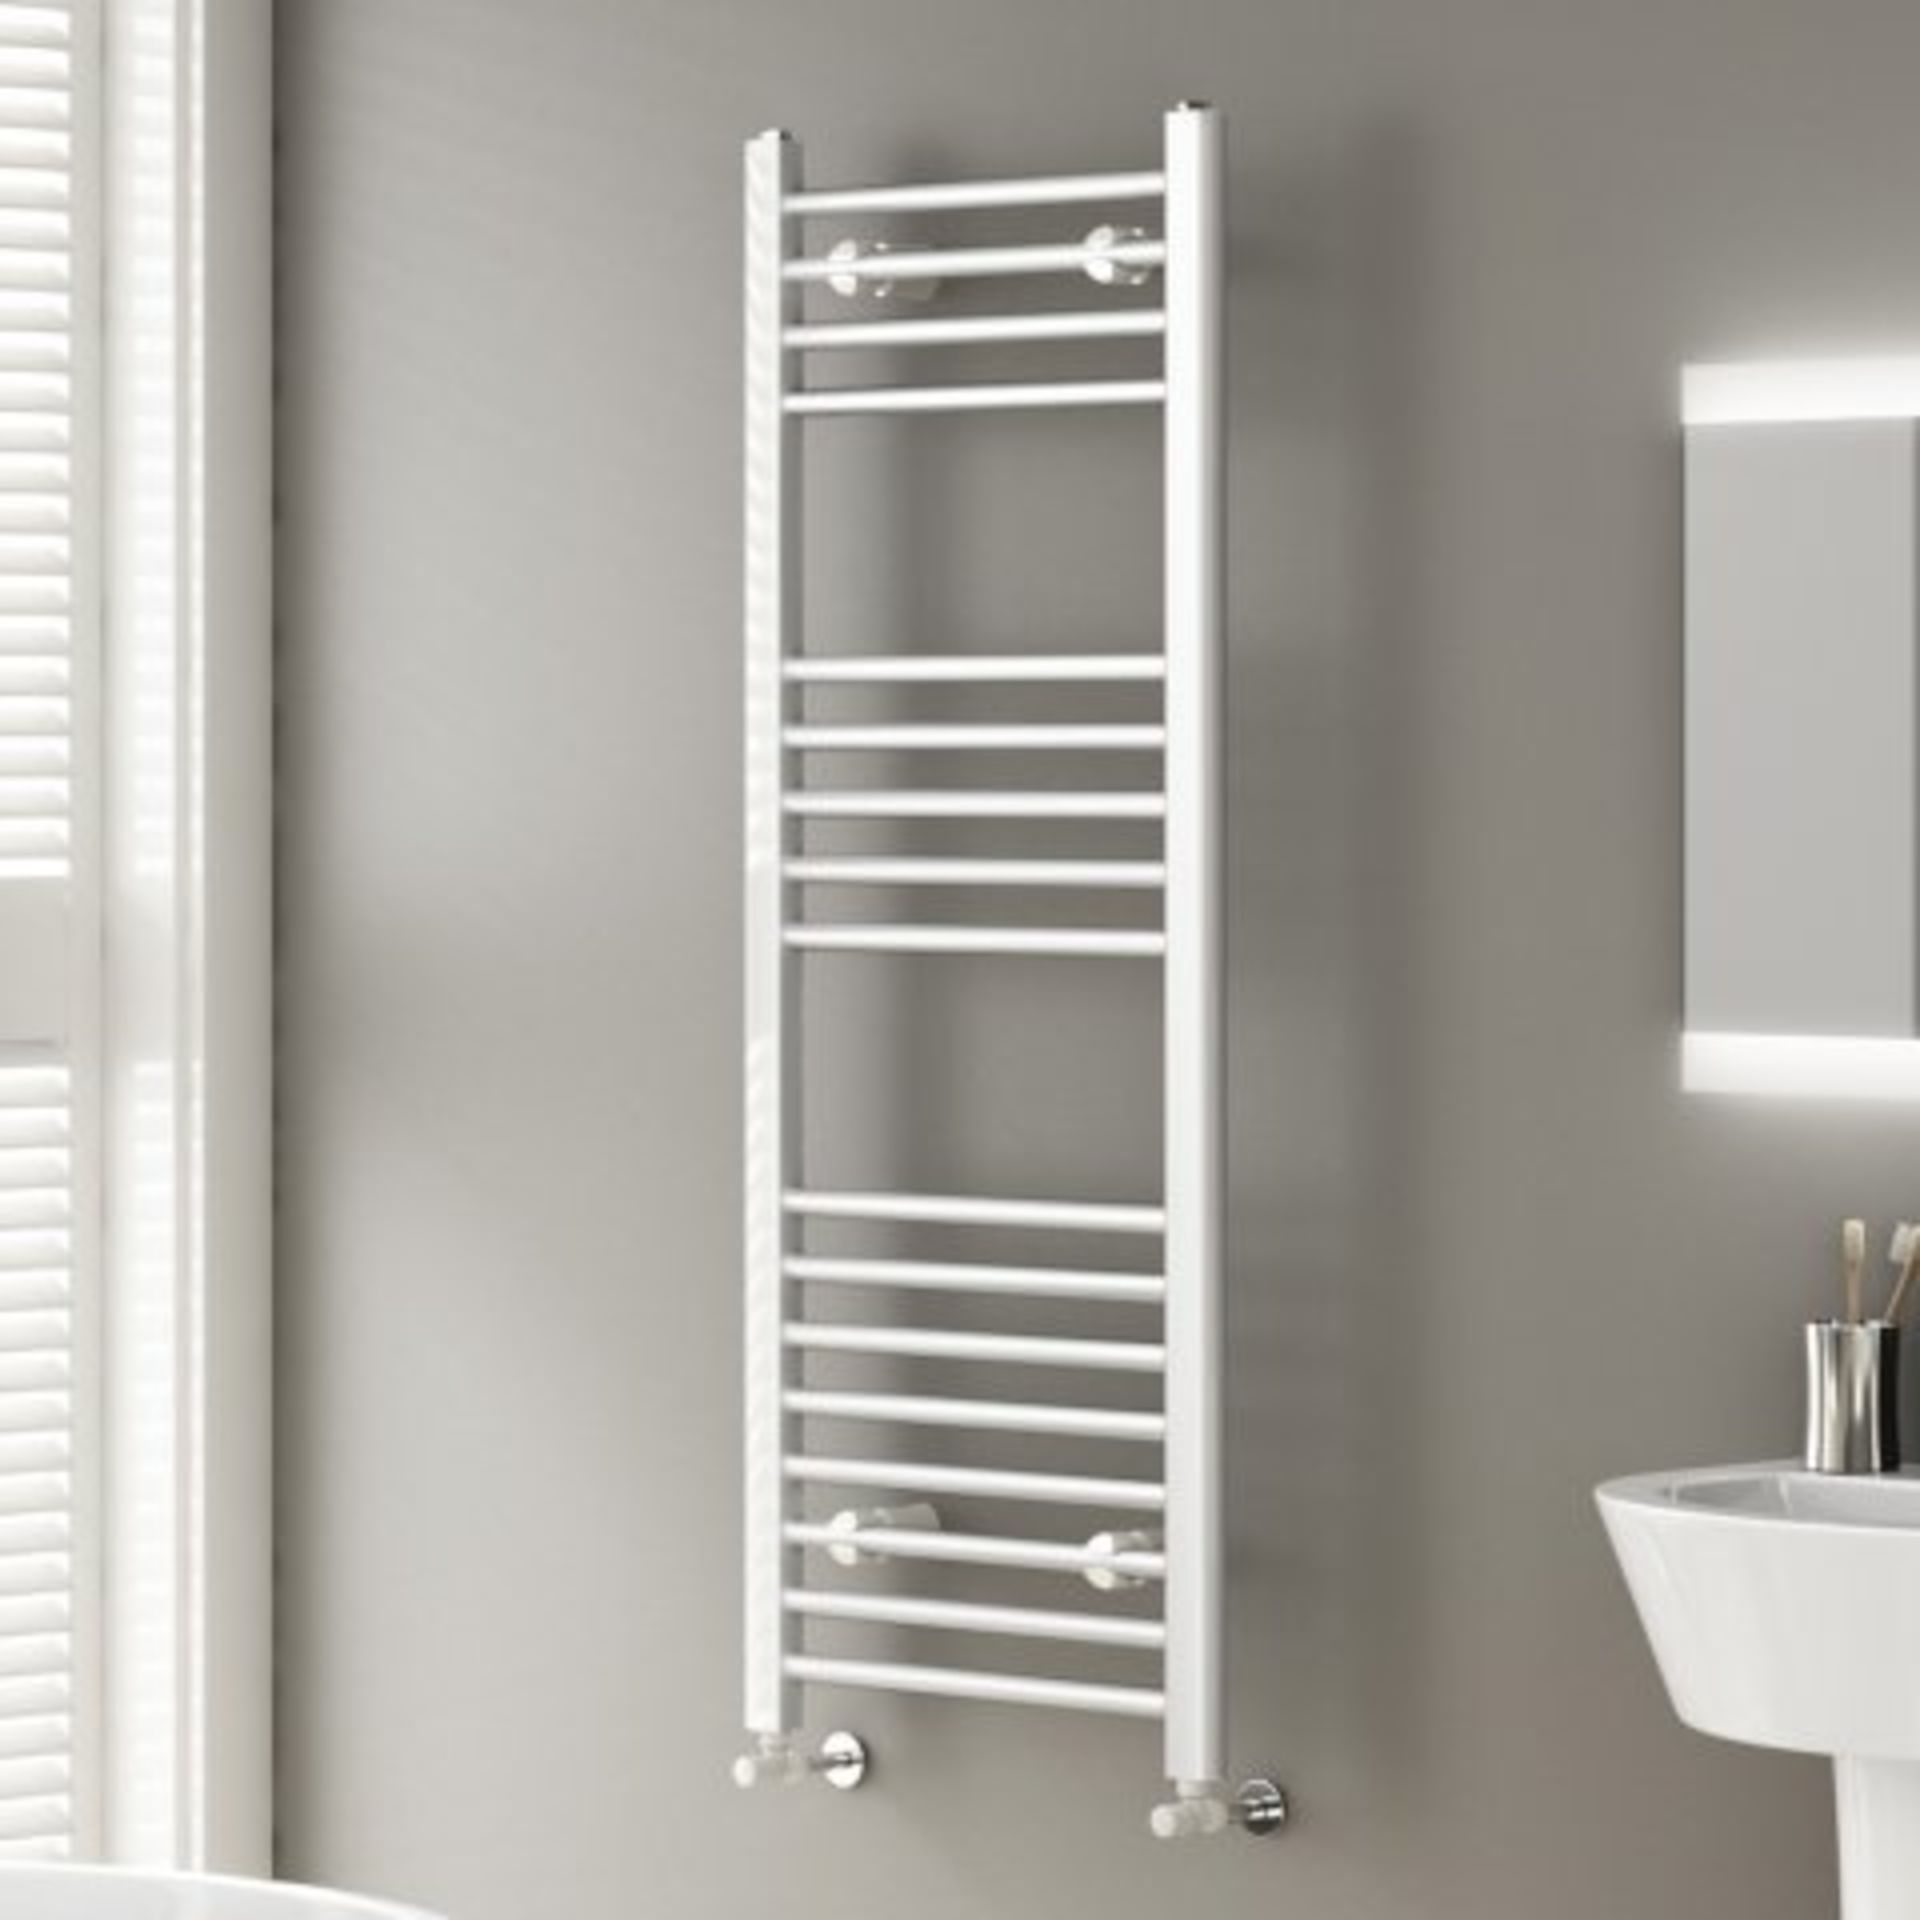 (N203) 1200x450mm White Straight Rail Ladder Towel Radiator. RRP £249.99. What heat output do I need